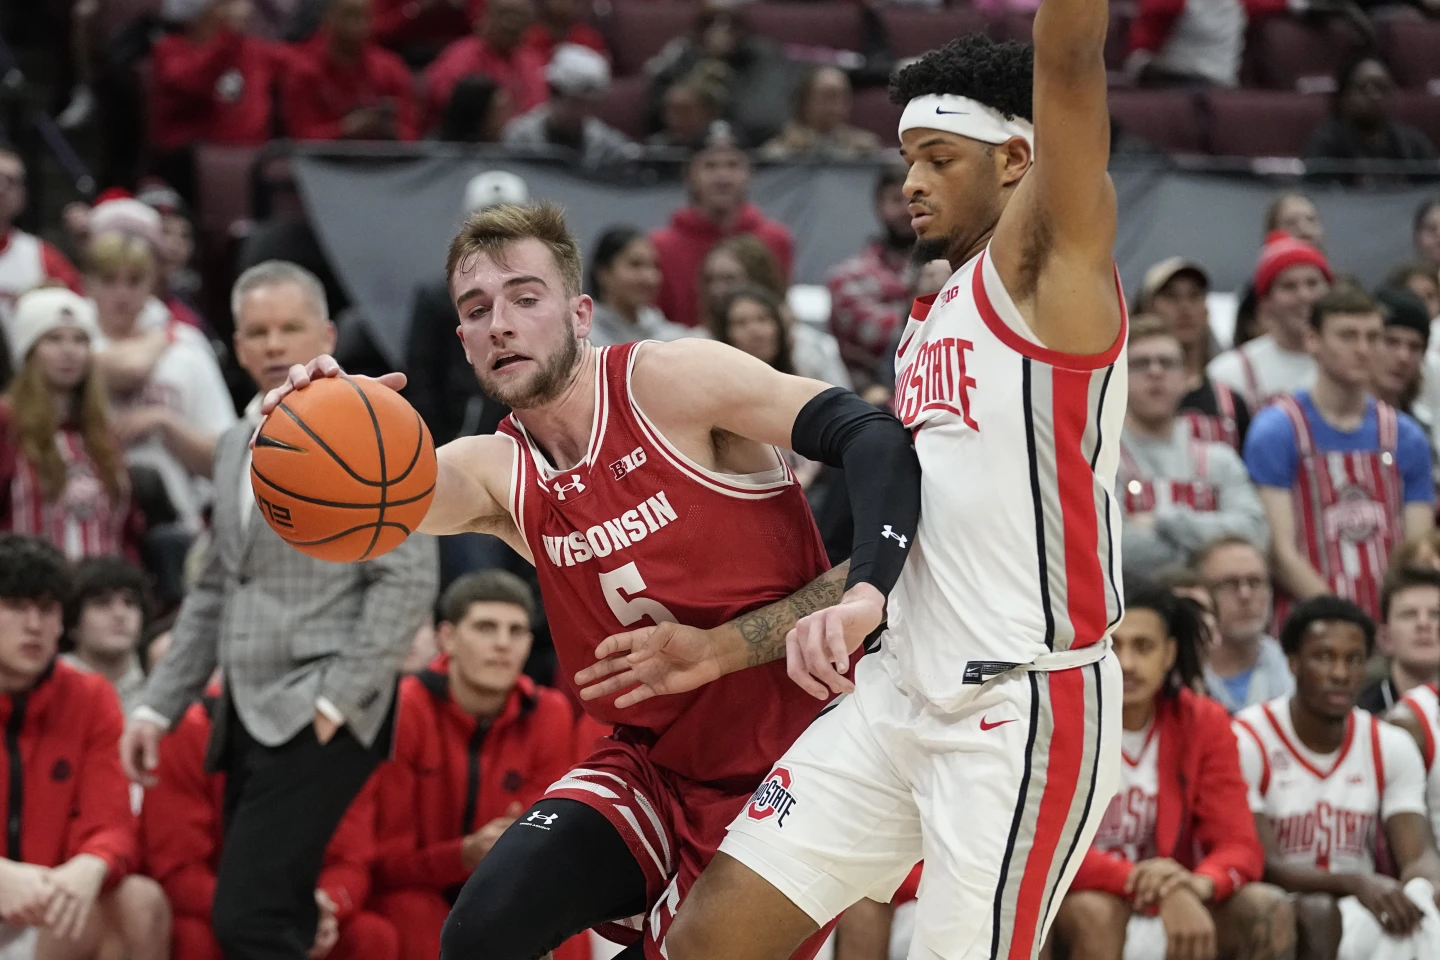 Klesmit scores 18 in 2nd half to rally No. 15 Wisconsin past Ohio State